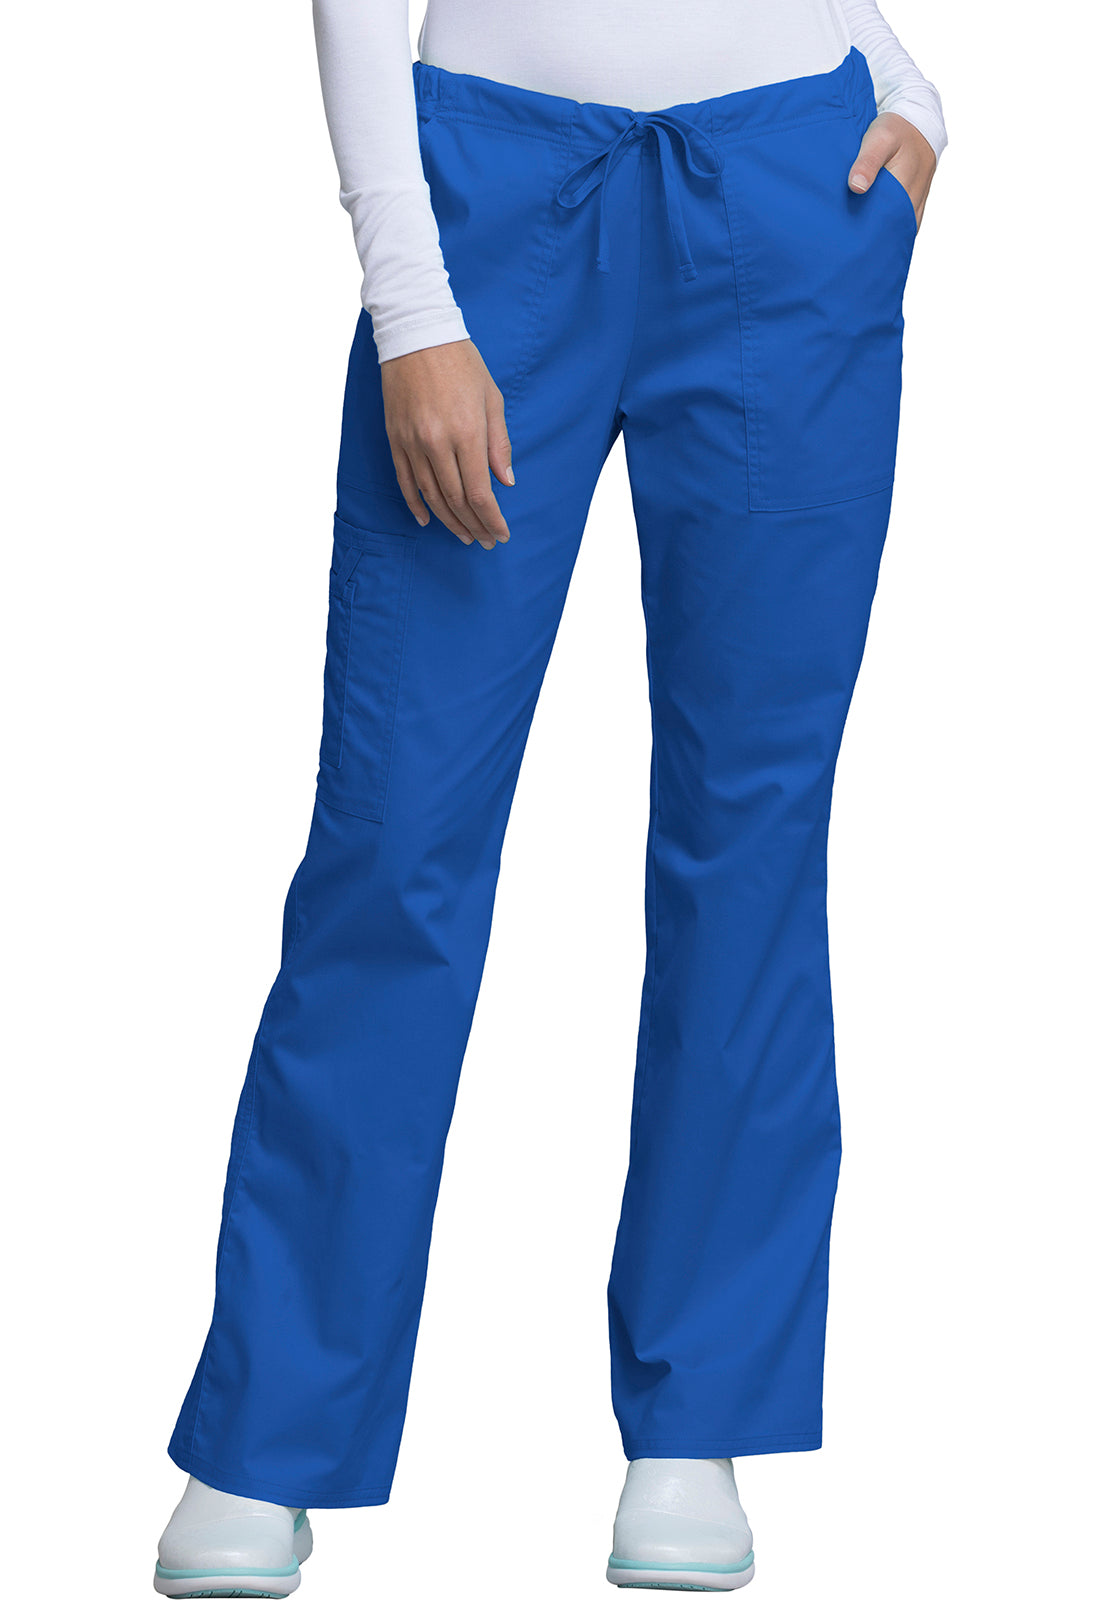 Clearance Cherokee Workwear Core Stretch Tall Drawstring Pants